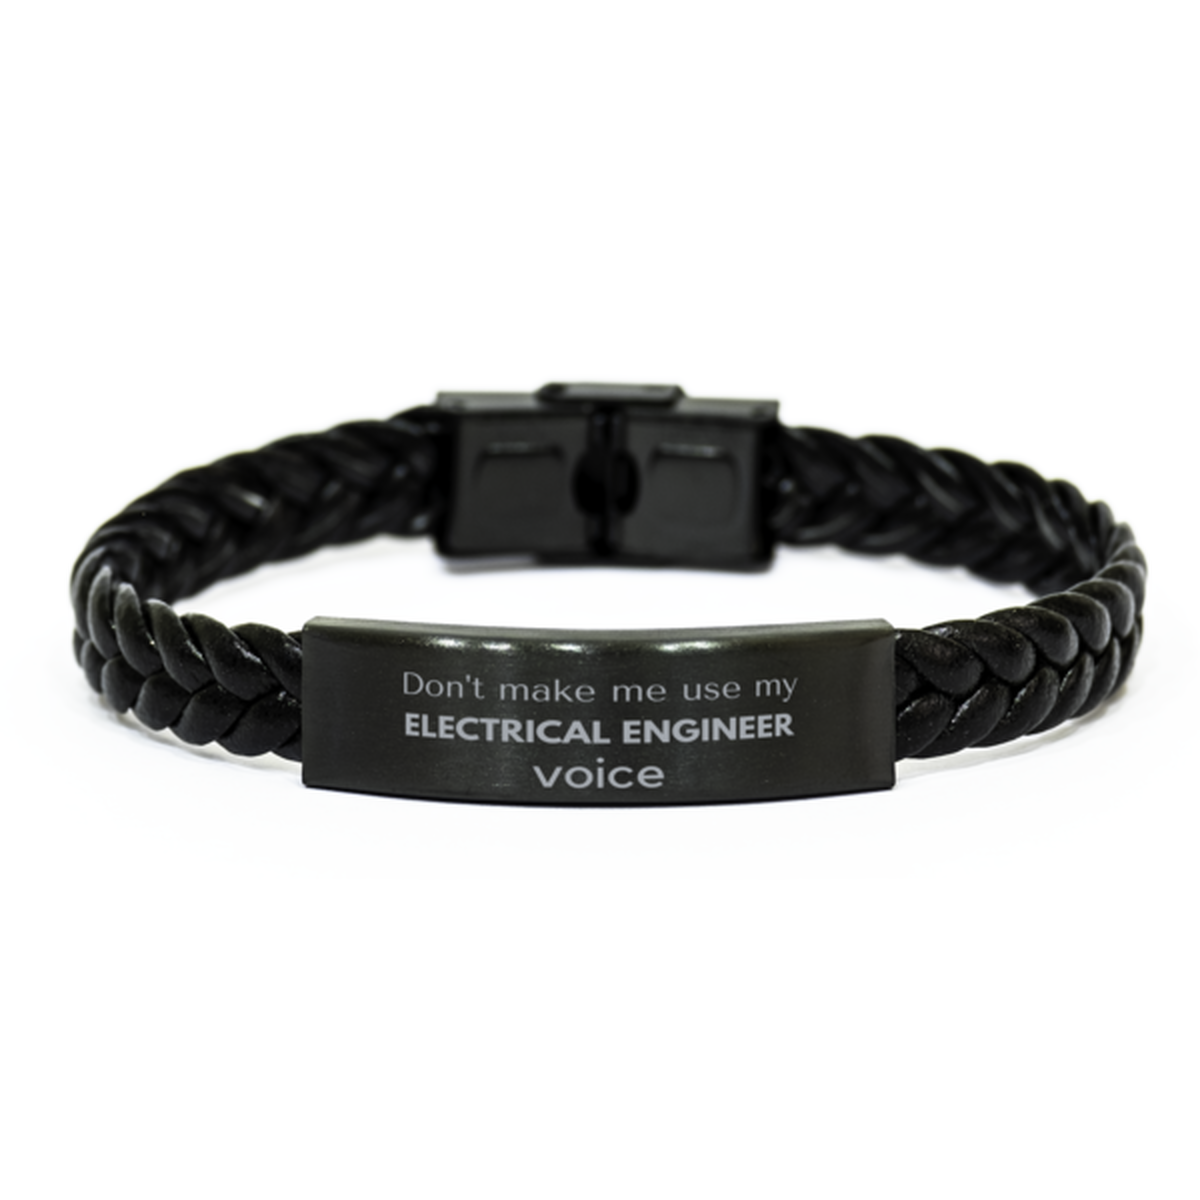 Don't make me use my Electrical Engineer voice, Sarcasm Electrical Engineer Gifts, Christmas Electrical Engineer Braided Leather Bracelet Birthday Unique Gifts For Electrical Engineer Coworkers, Men, Women, Colleague, Friends